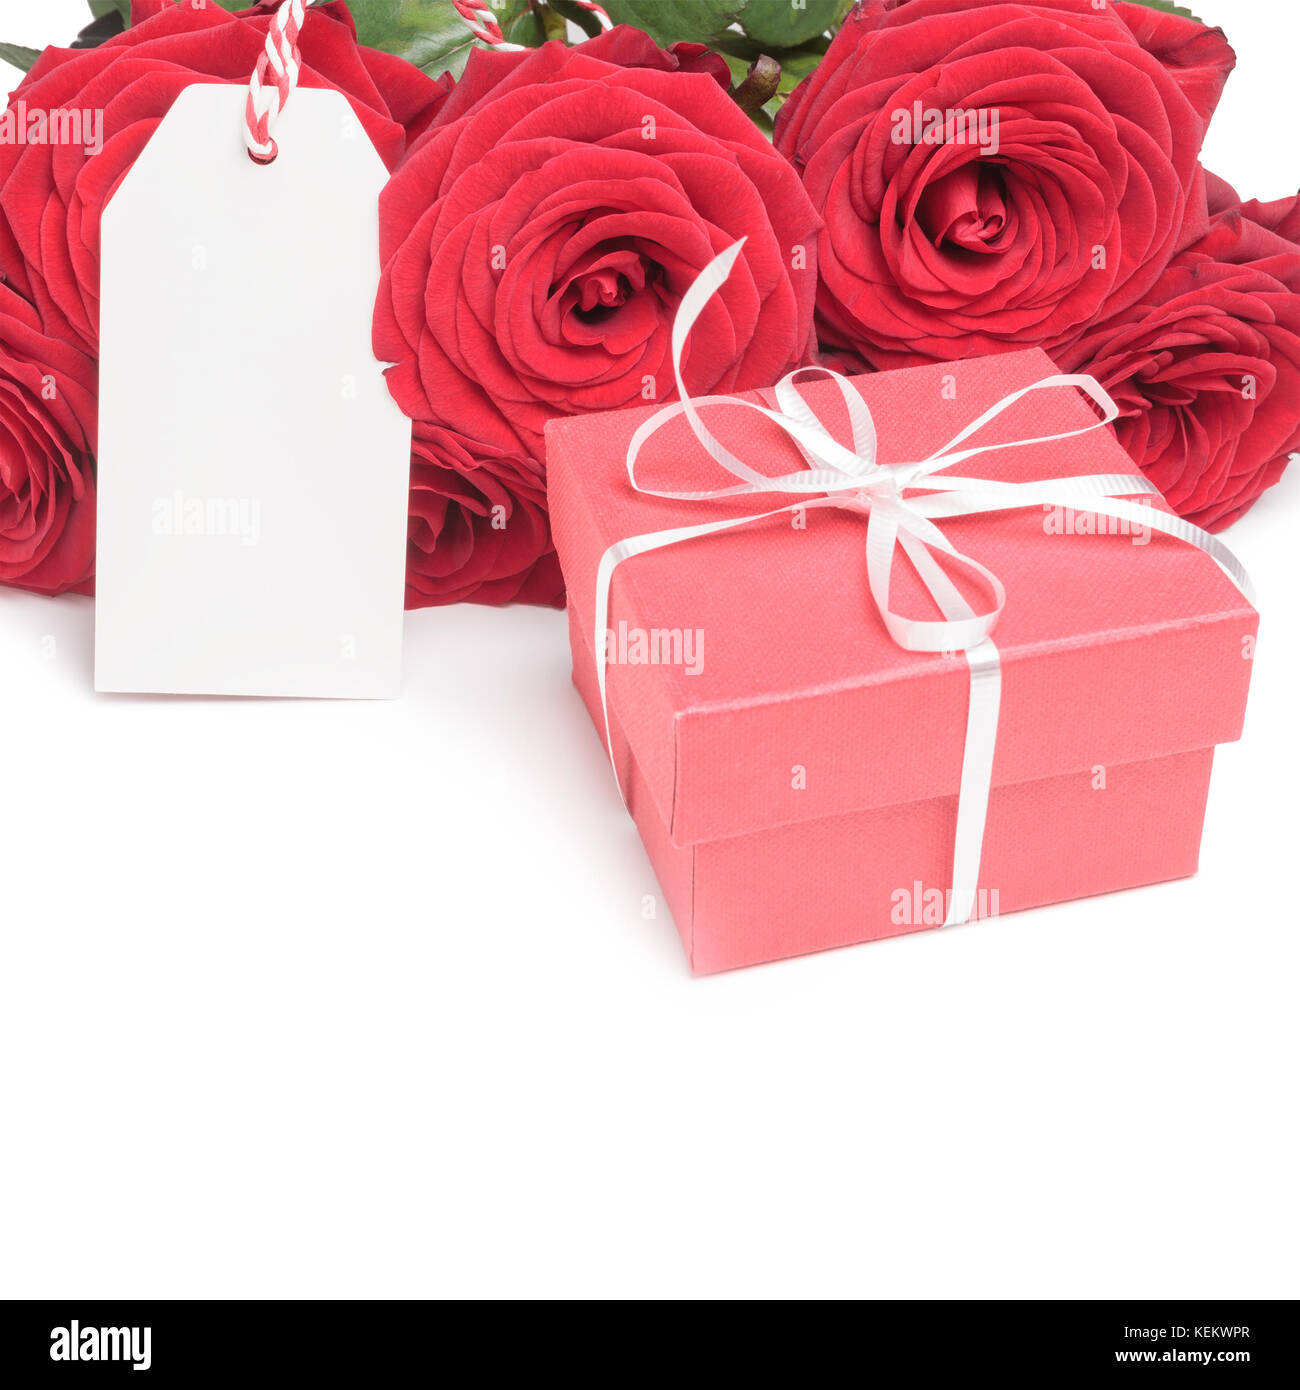 Card, box and roses on white  Stock Photo